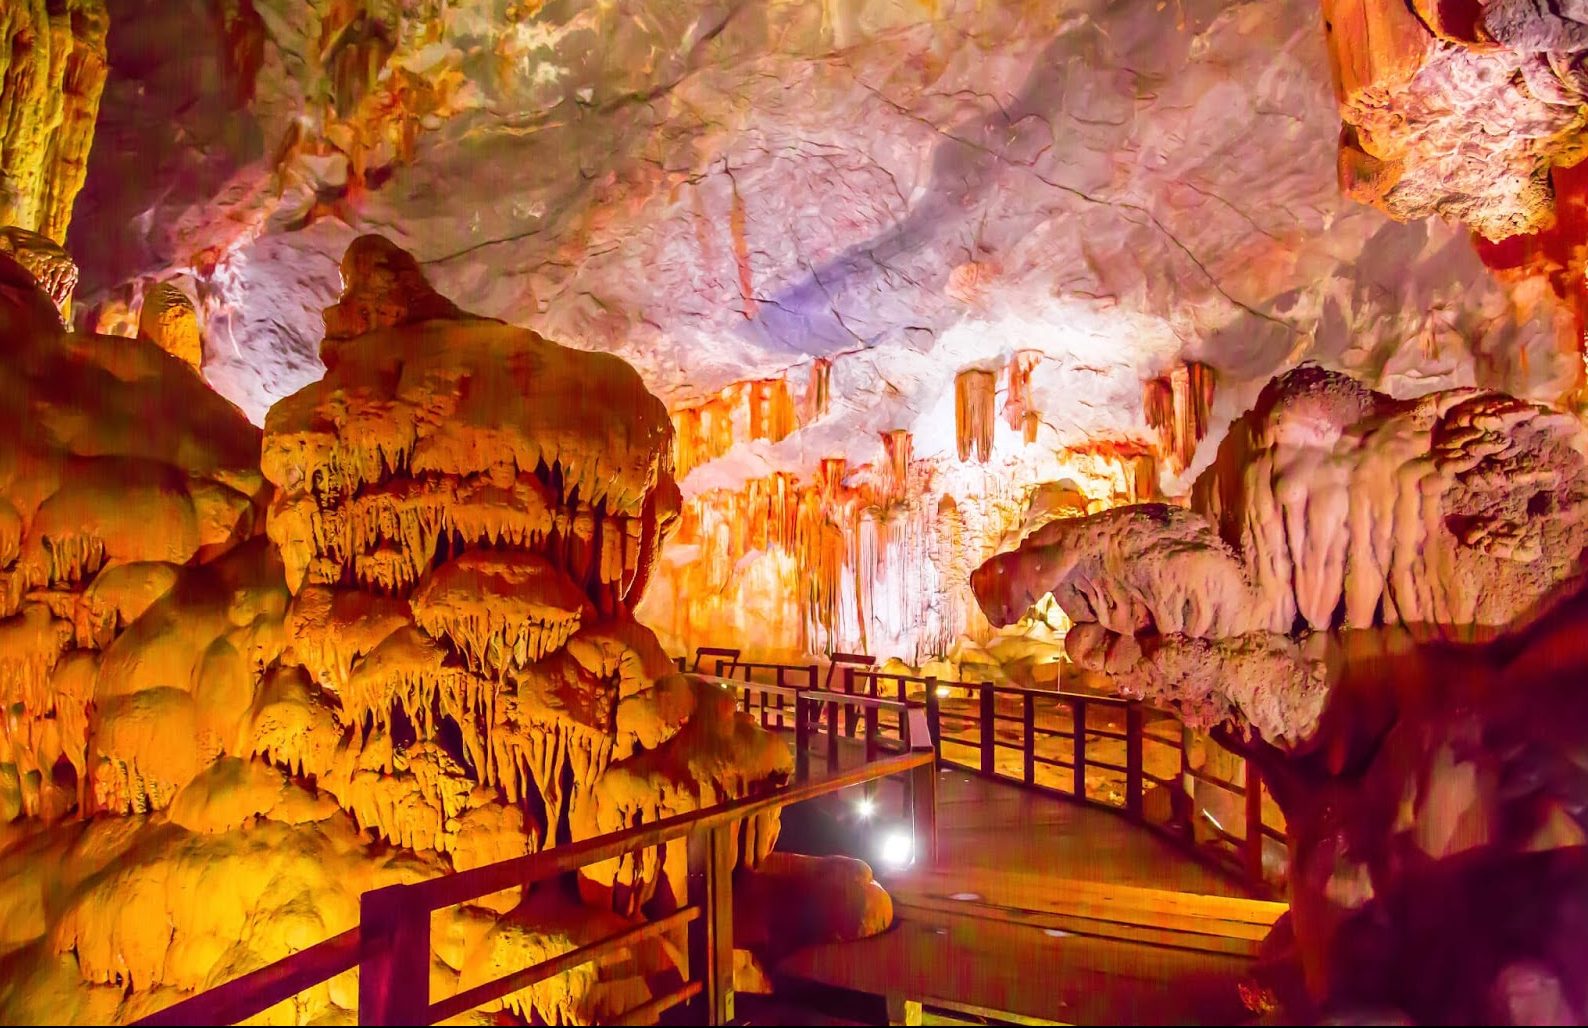 Thien Cung Cave | Halong Bay Attractions - Asianway Travel